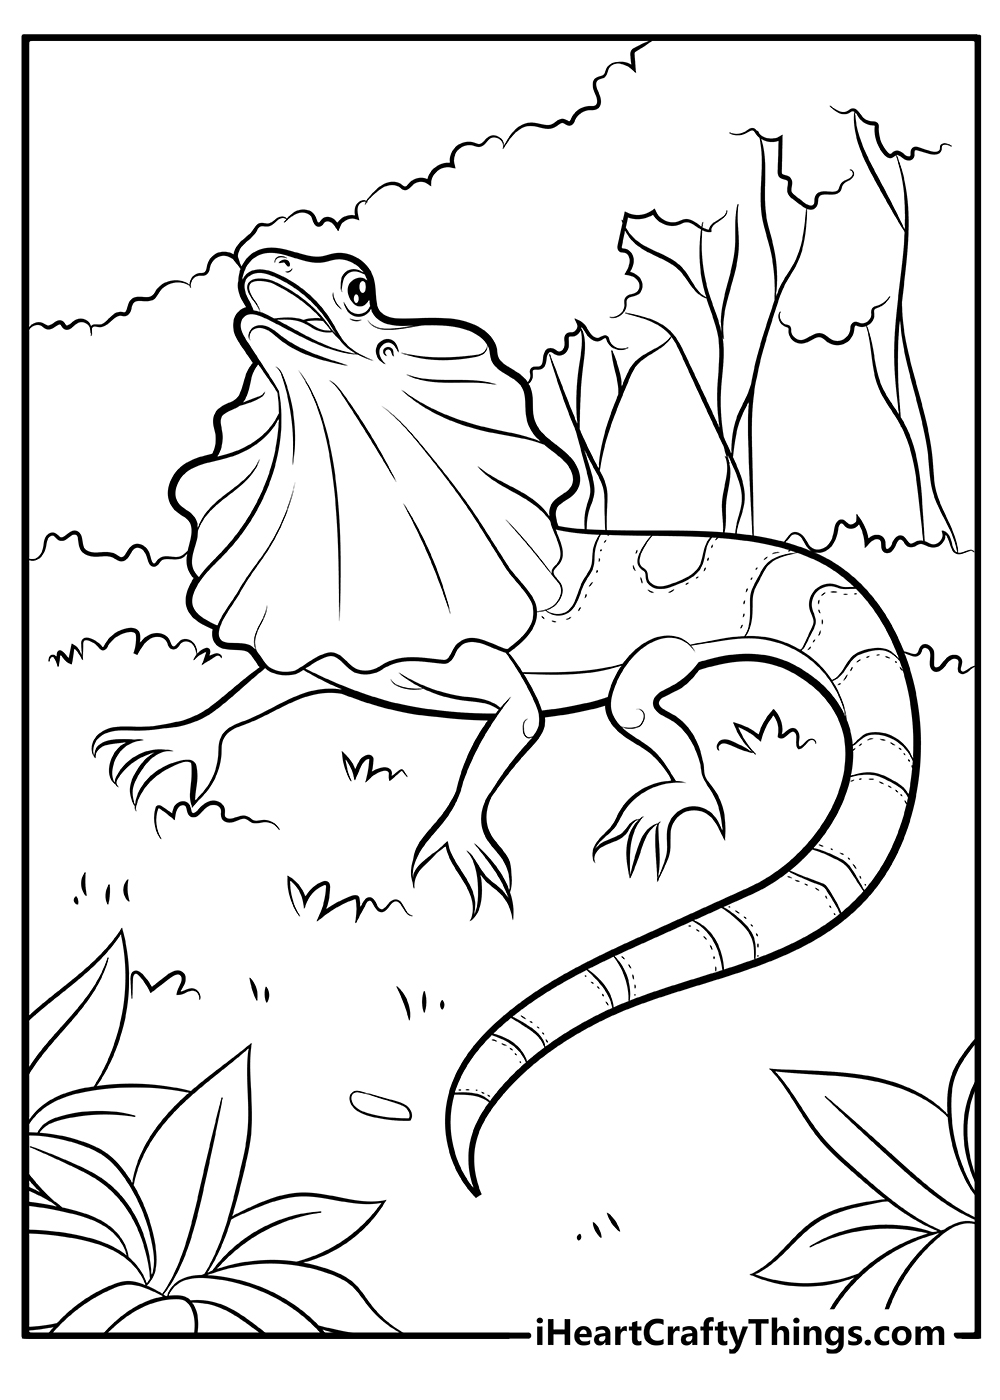 Lizard Coloring Pages for kids free download